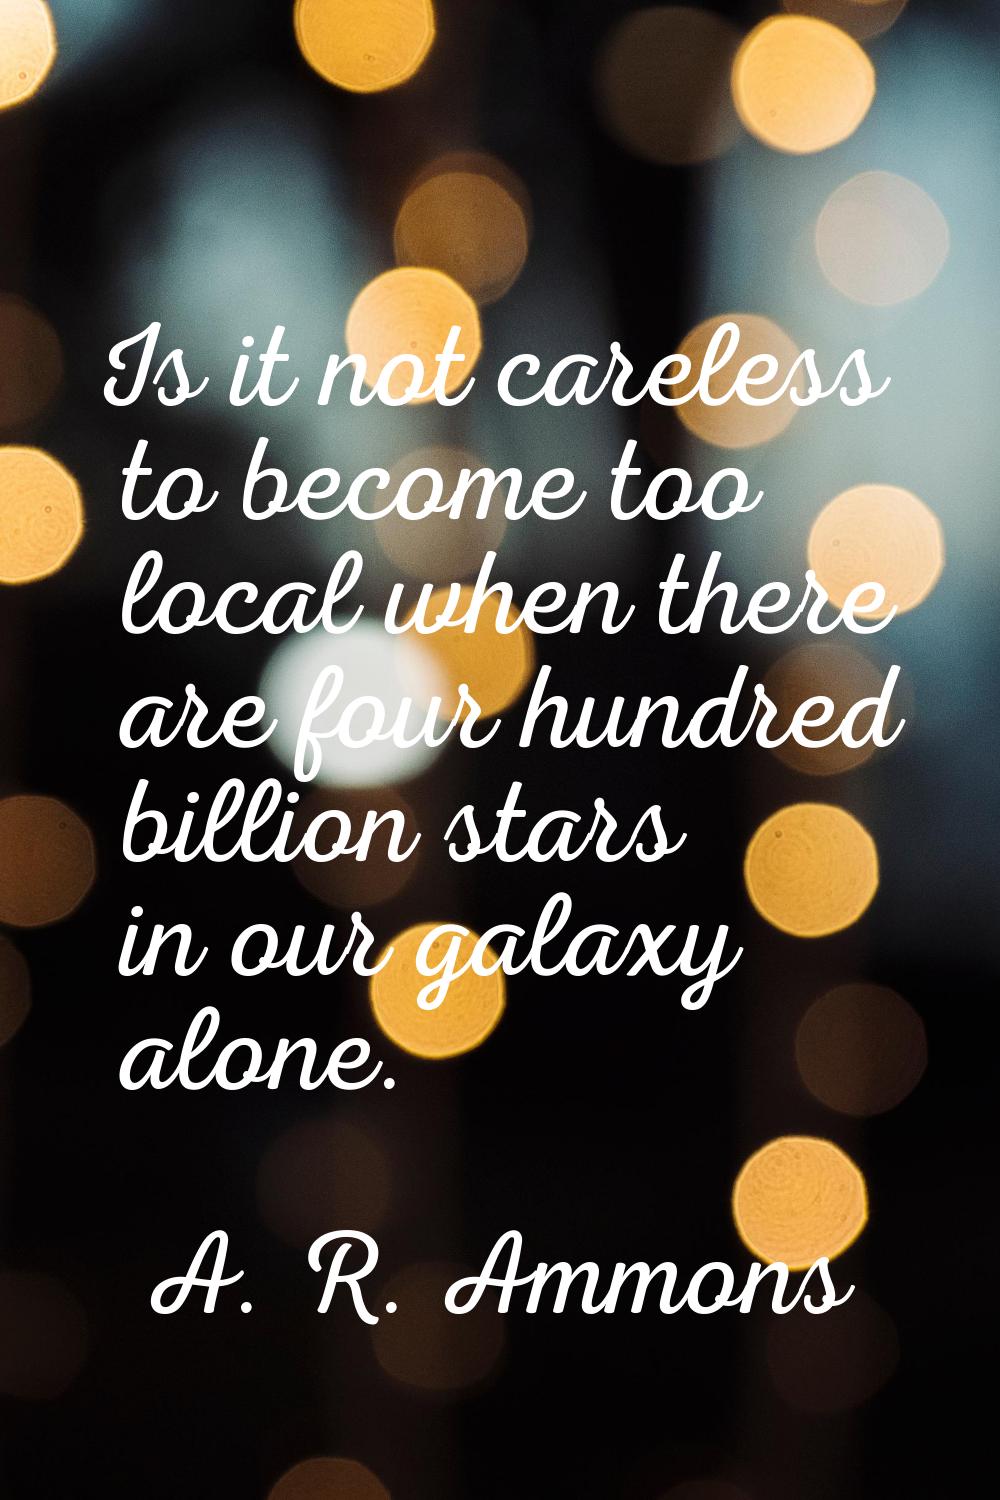 Is it not careless to become too local when there are four hundred billion stars in our galaxy alon